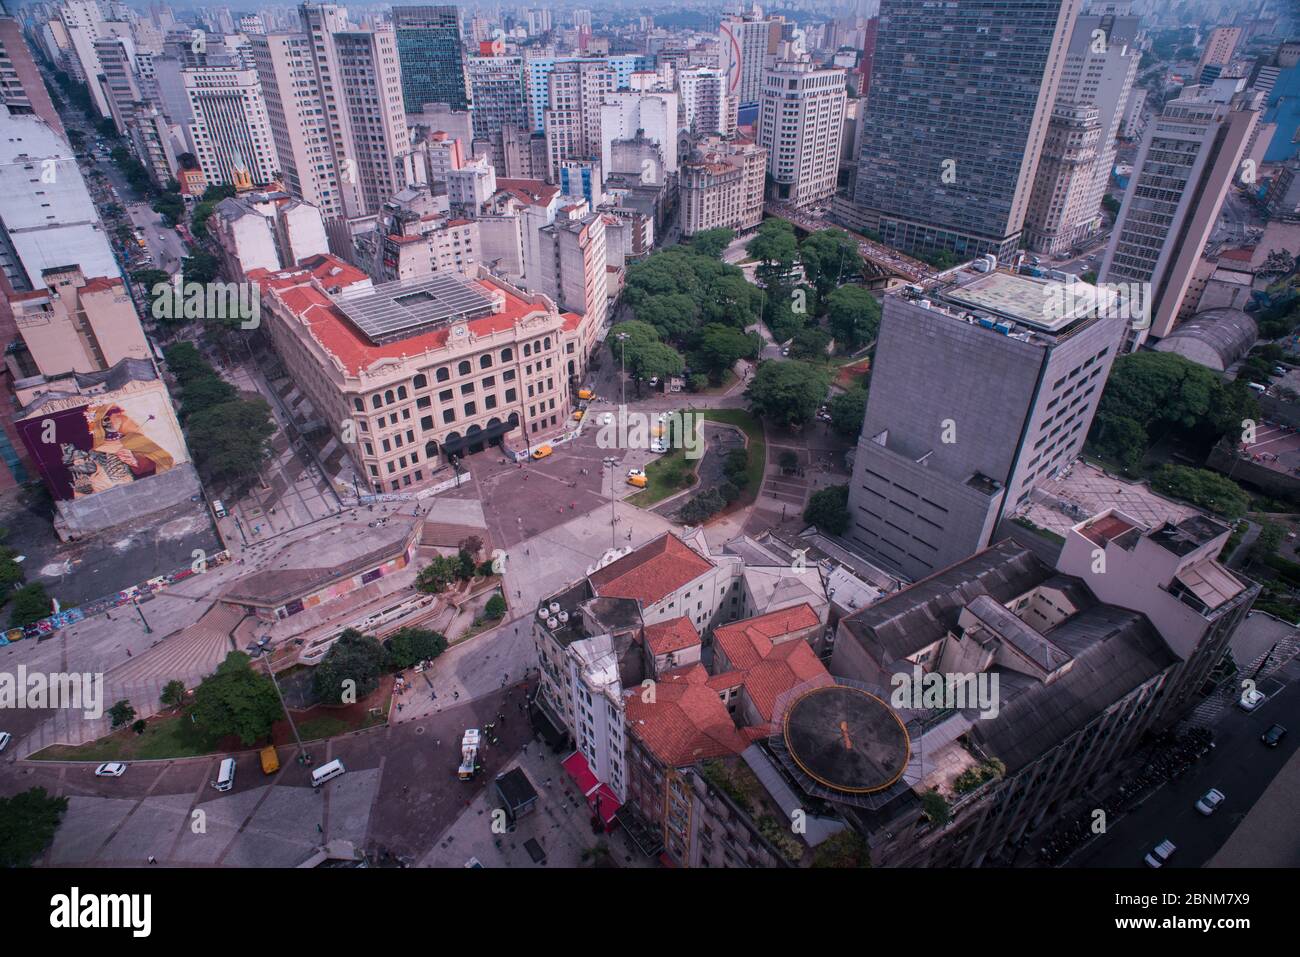 Sao Paulo, Brazil - December 21, 2015: Aerial view of Sao Paulo downtown, economic capital of Brazil and the biggest metropolis of Latin America with Stock Photo